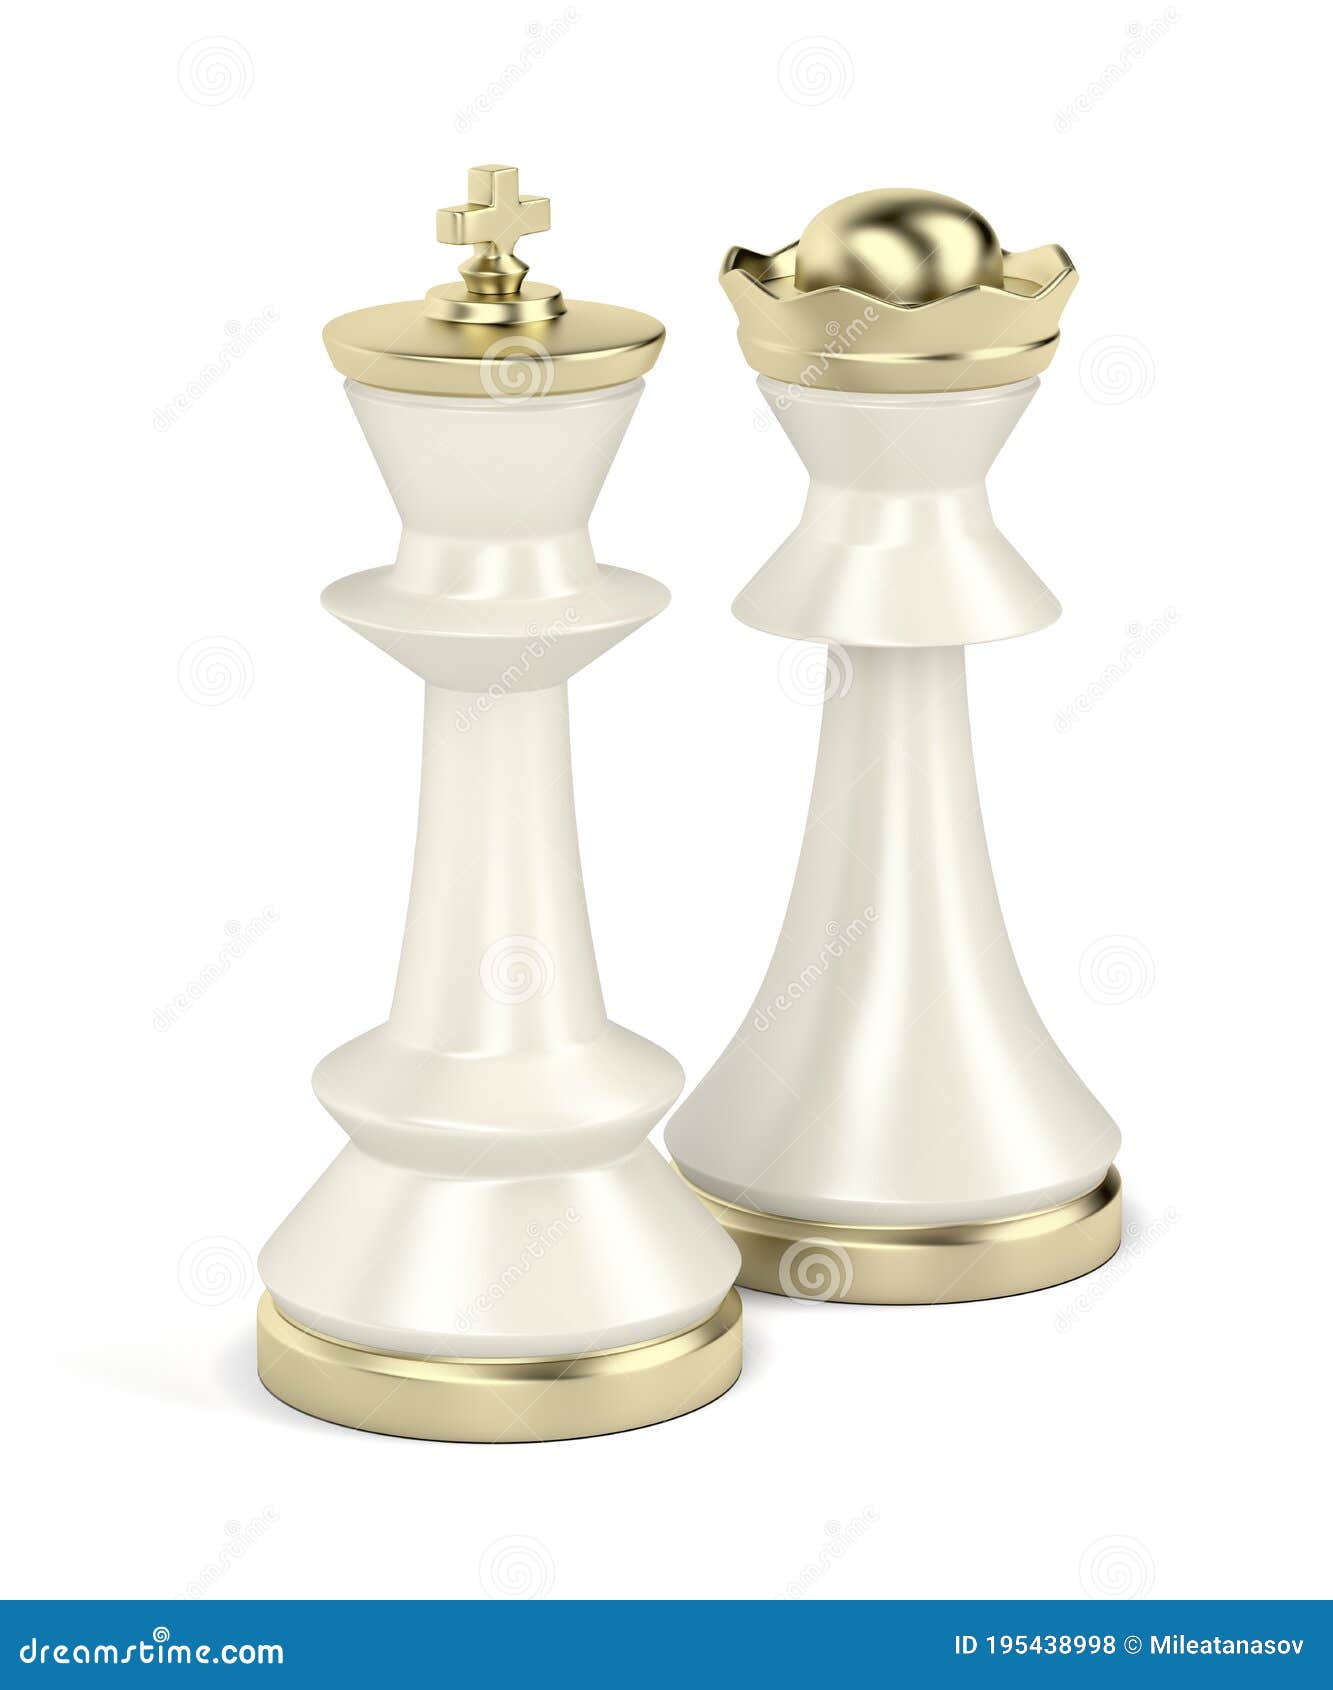 Wallpaper chess king and queen figures with crowns isolated on